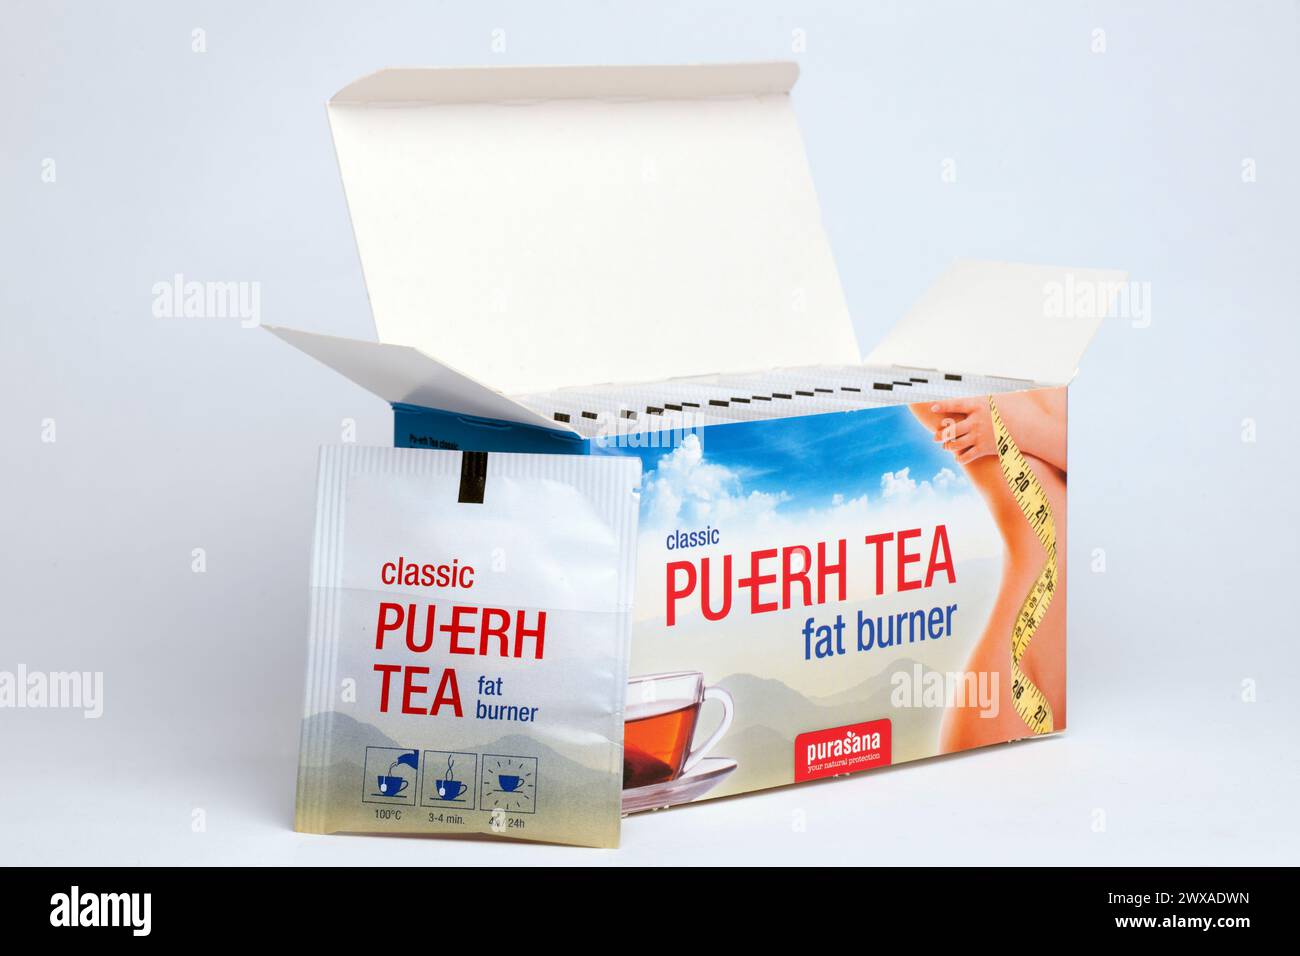 Box of Pu-erh classic  tea  fermented green tea with enriched herbs goldenrod and rosemary  - 20 sachets Stock Photo